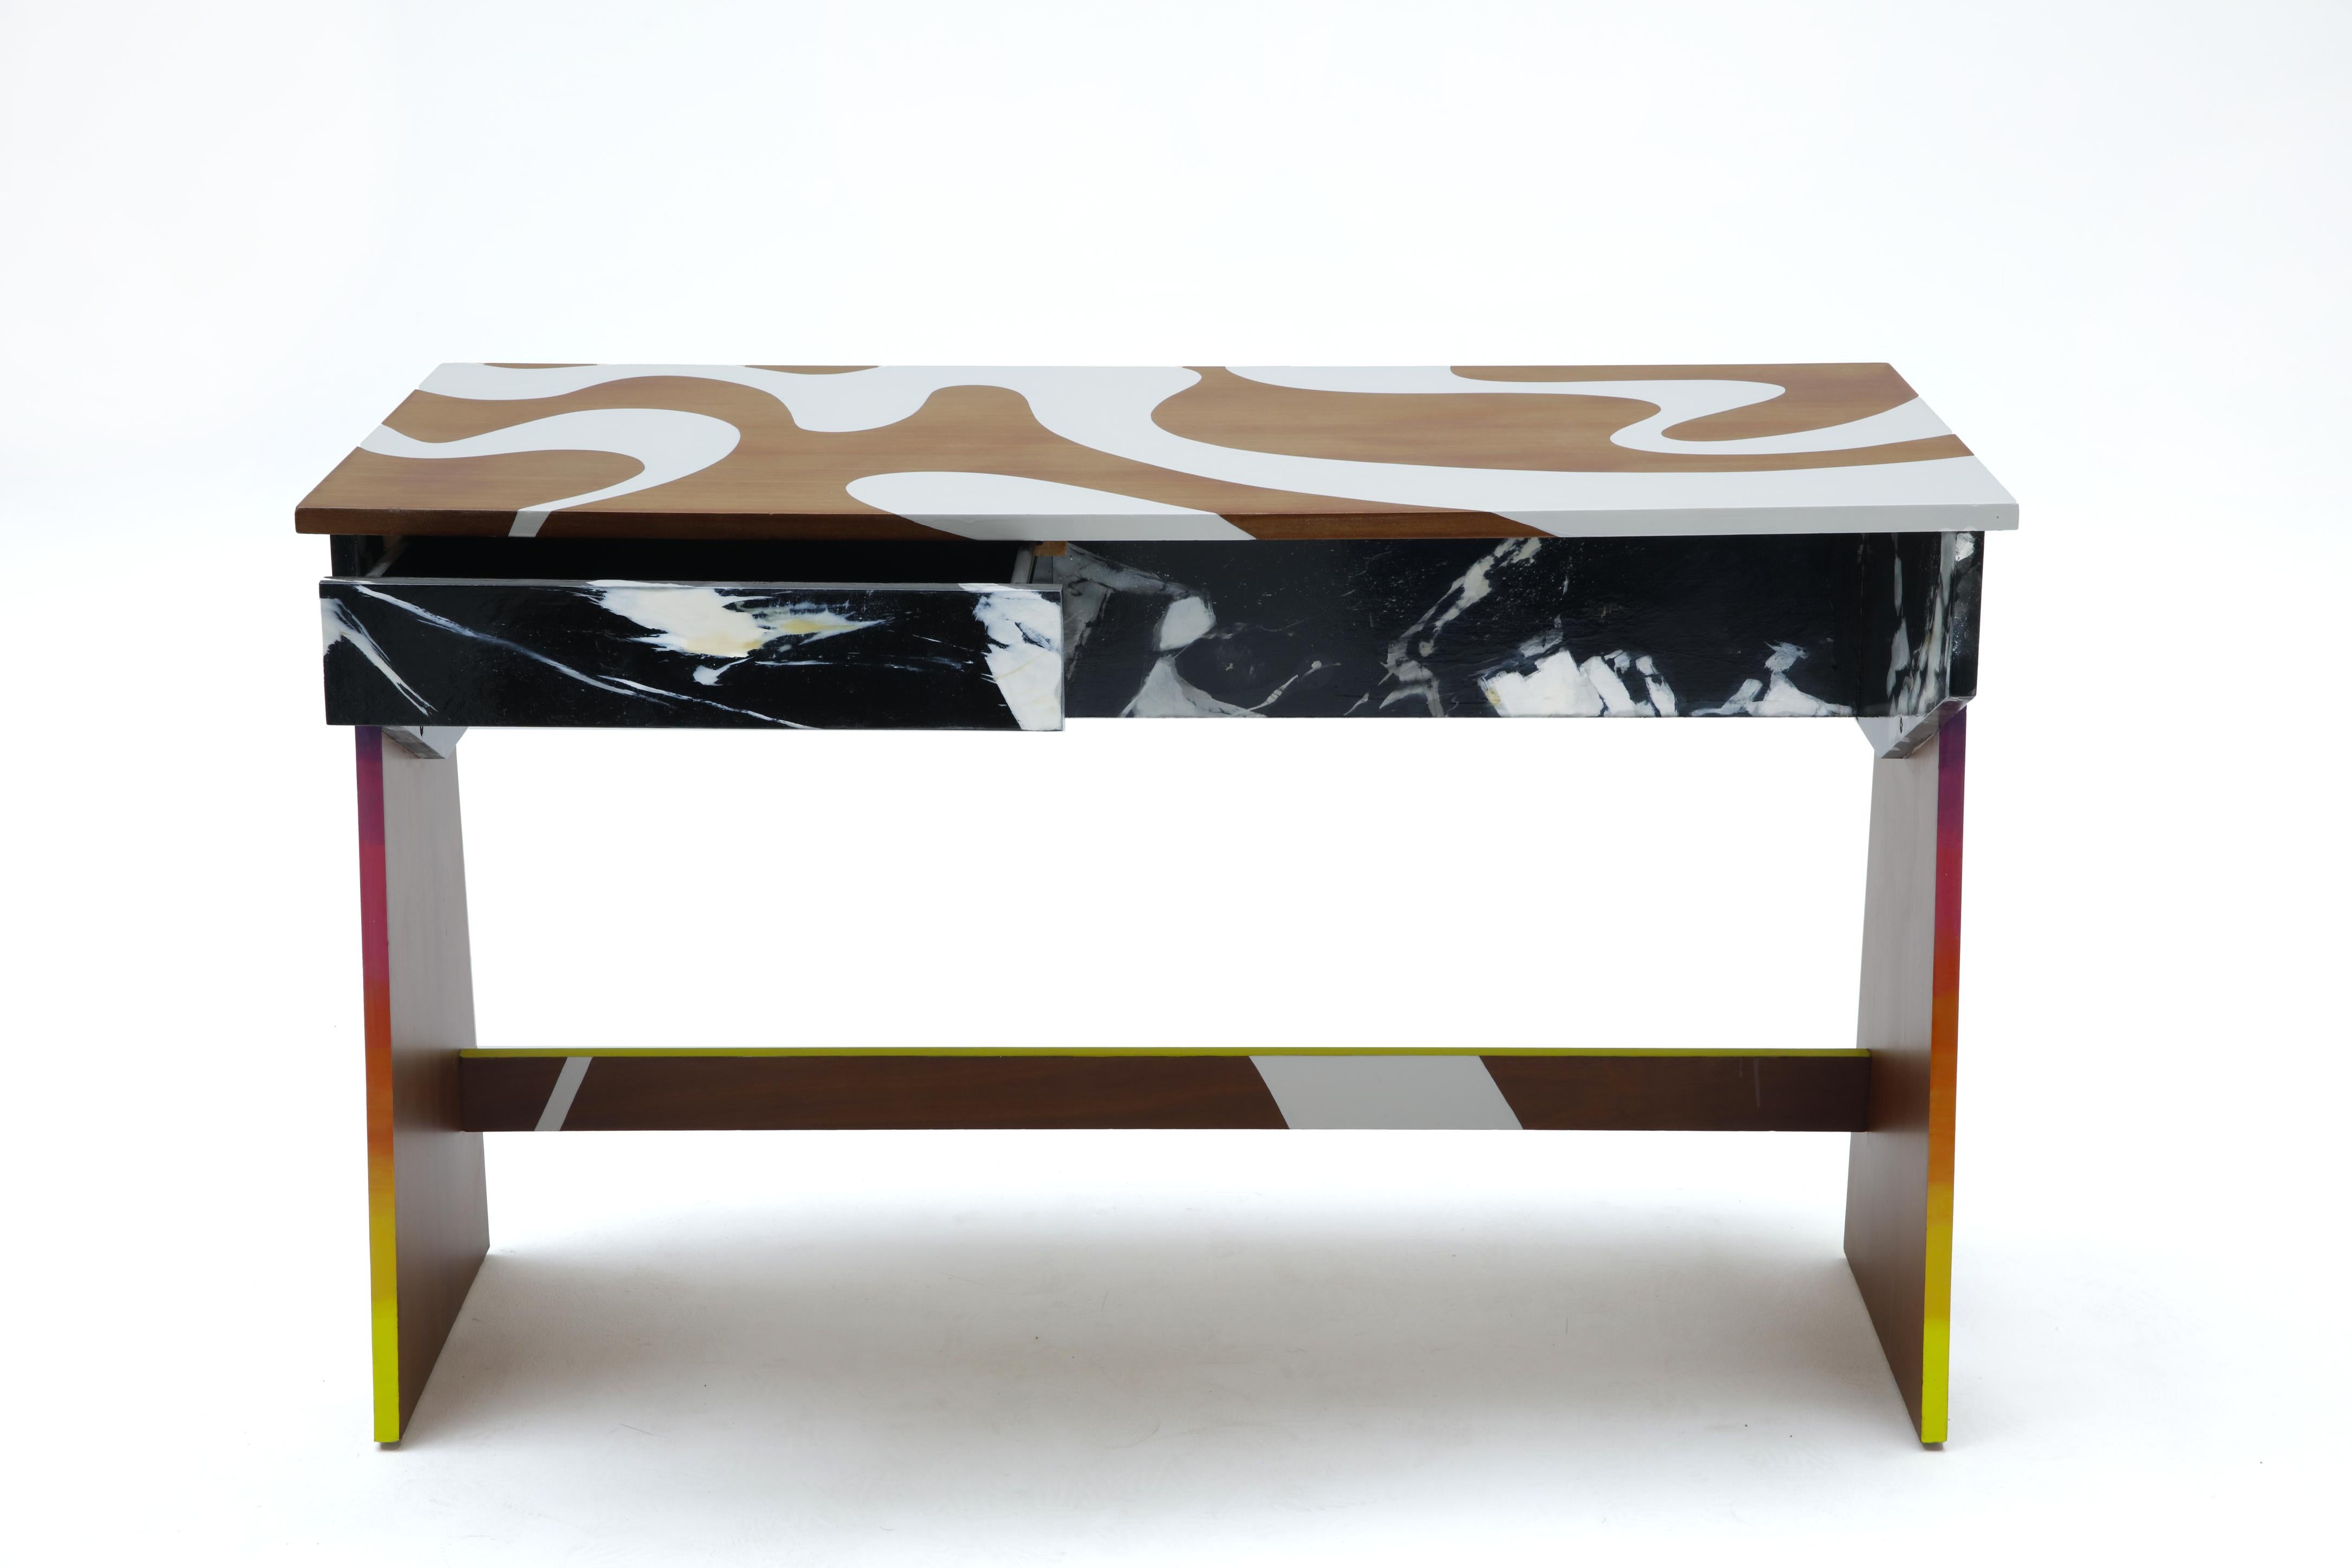 Origin 8 desk by POLCHA
Dimensions: W 120 x D 60 x H 75 cm
Material: Wood / Trompe l'oeil Grand Antique Marble / Degraded Paint / White Lacquer / Shiny Varnish

After more than fifteen years of friendship, we can finally realize our common